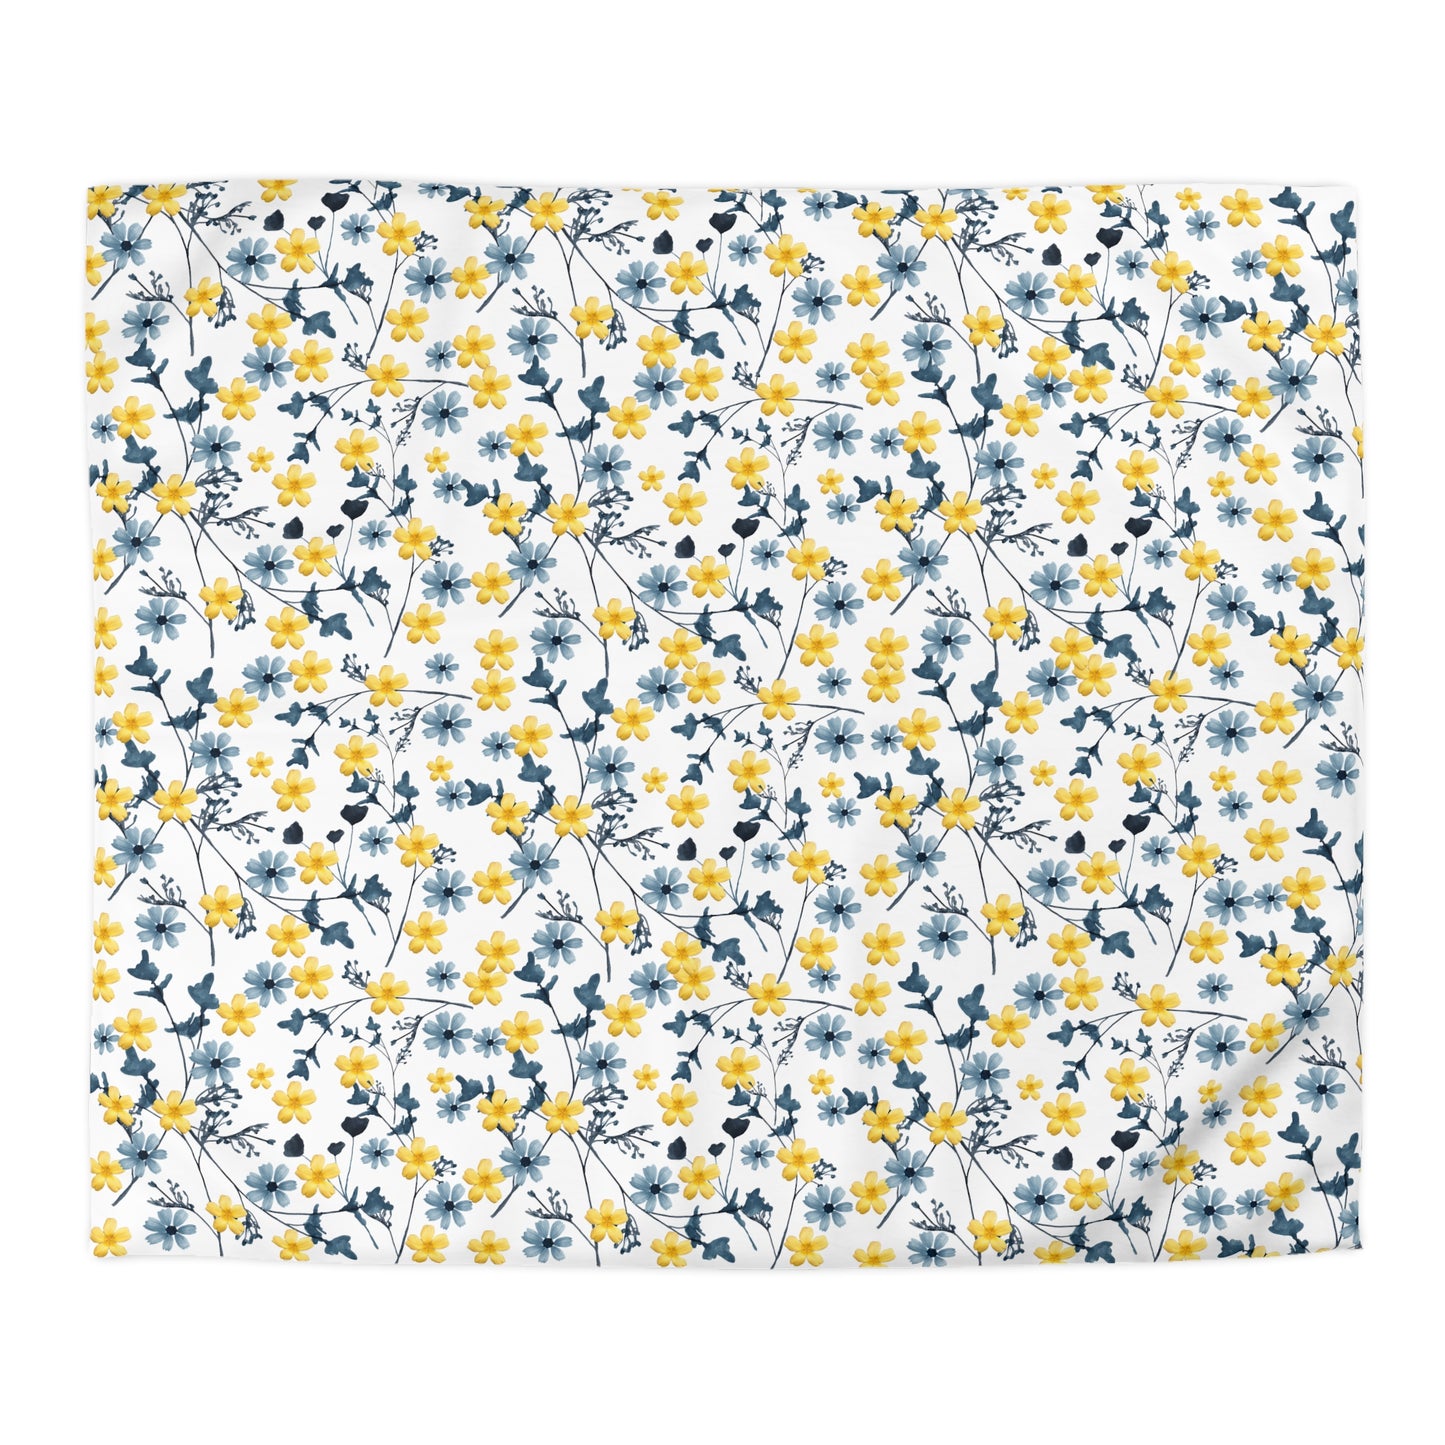 Floral Microfiber Duvet Cover / Blue and Yellow Flower Print